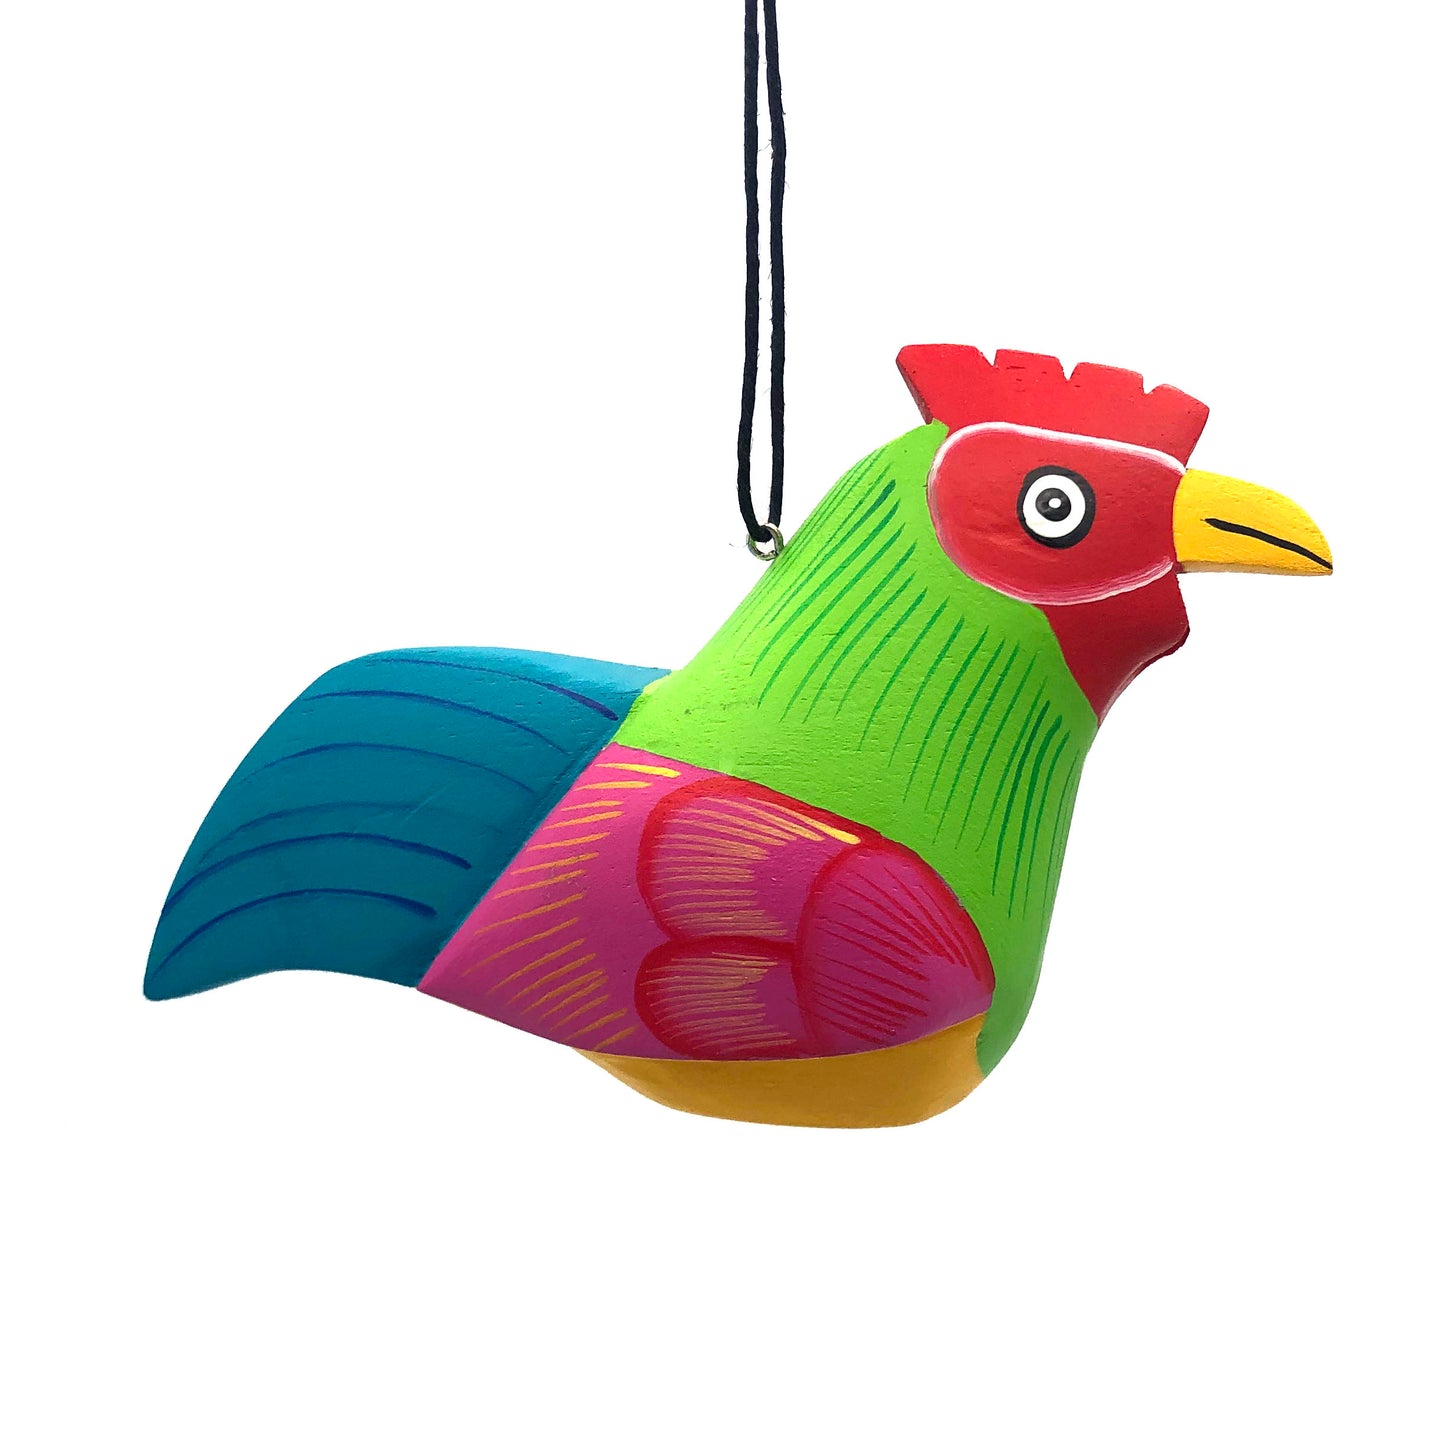 Whimsical Rooster Balsa Ornament